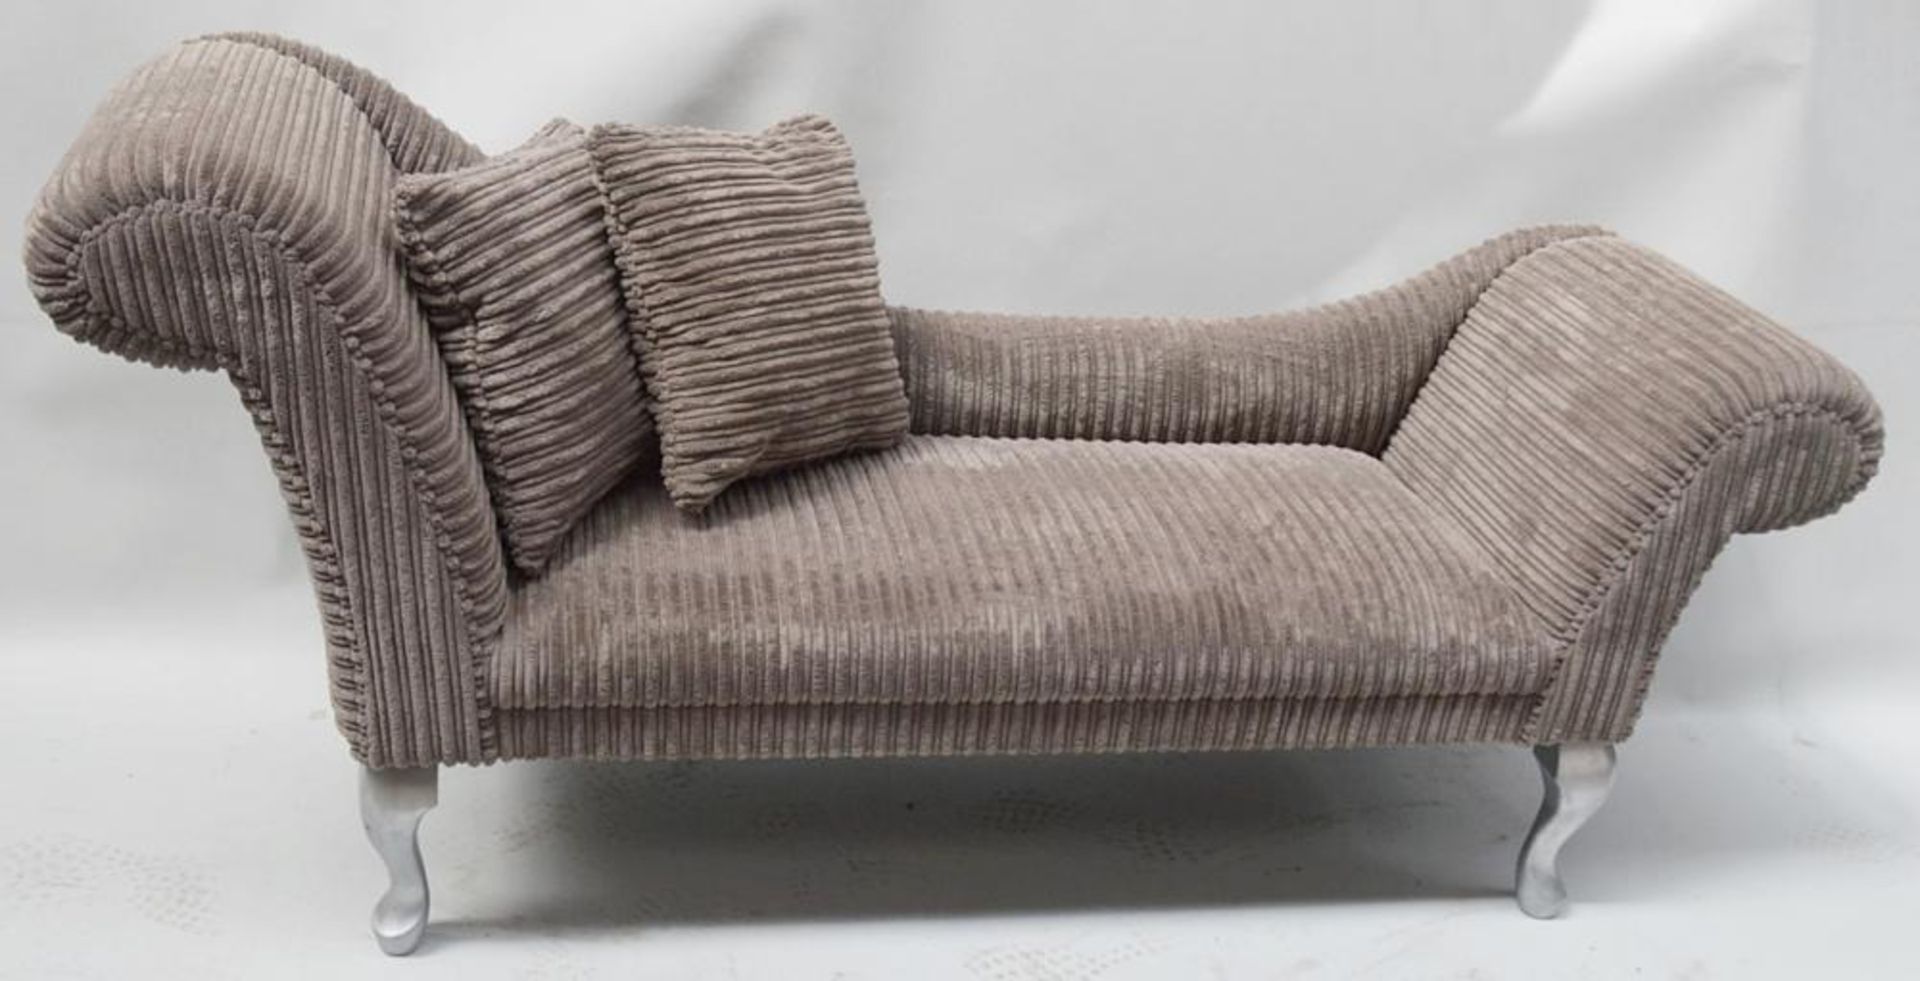 1 x Chais Lounge In A Soft Mocha Fabric With Silver Painted Legs - Dimensions: H80 x W177 x D50cm, S